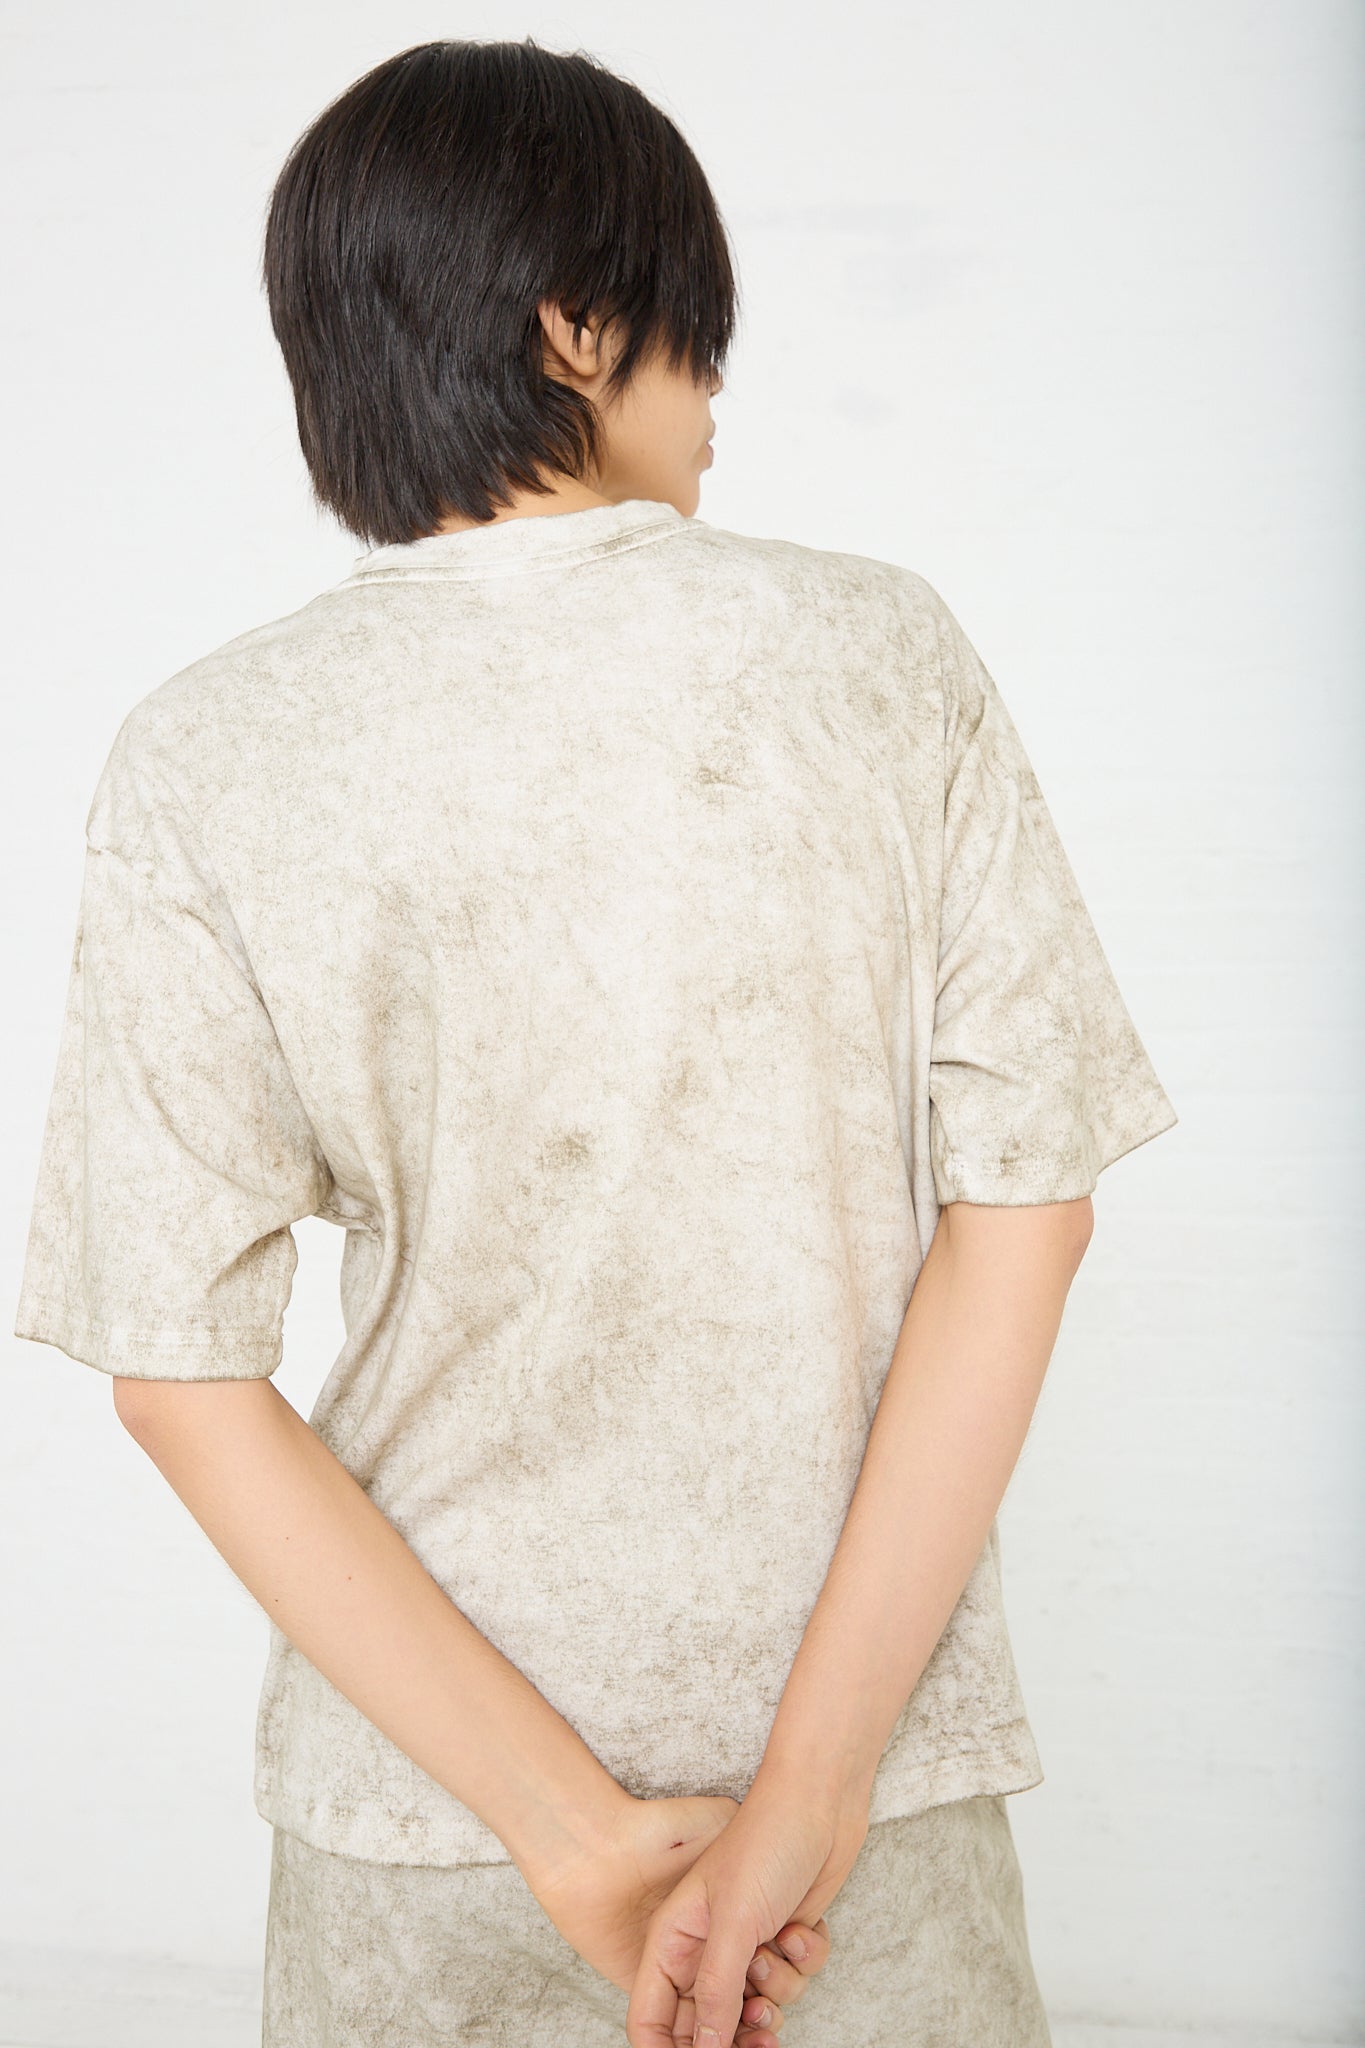 The Lauren Manoogian Pima Cotton Lunar Tee in Olive features a boxy silhouette and dropped shoulders, creating an oversized tee look. Back view.